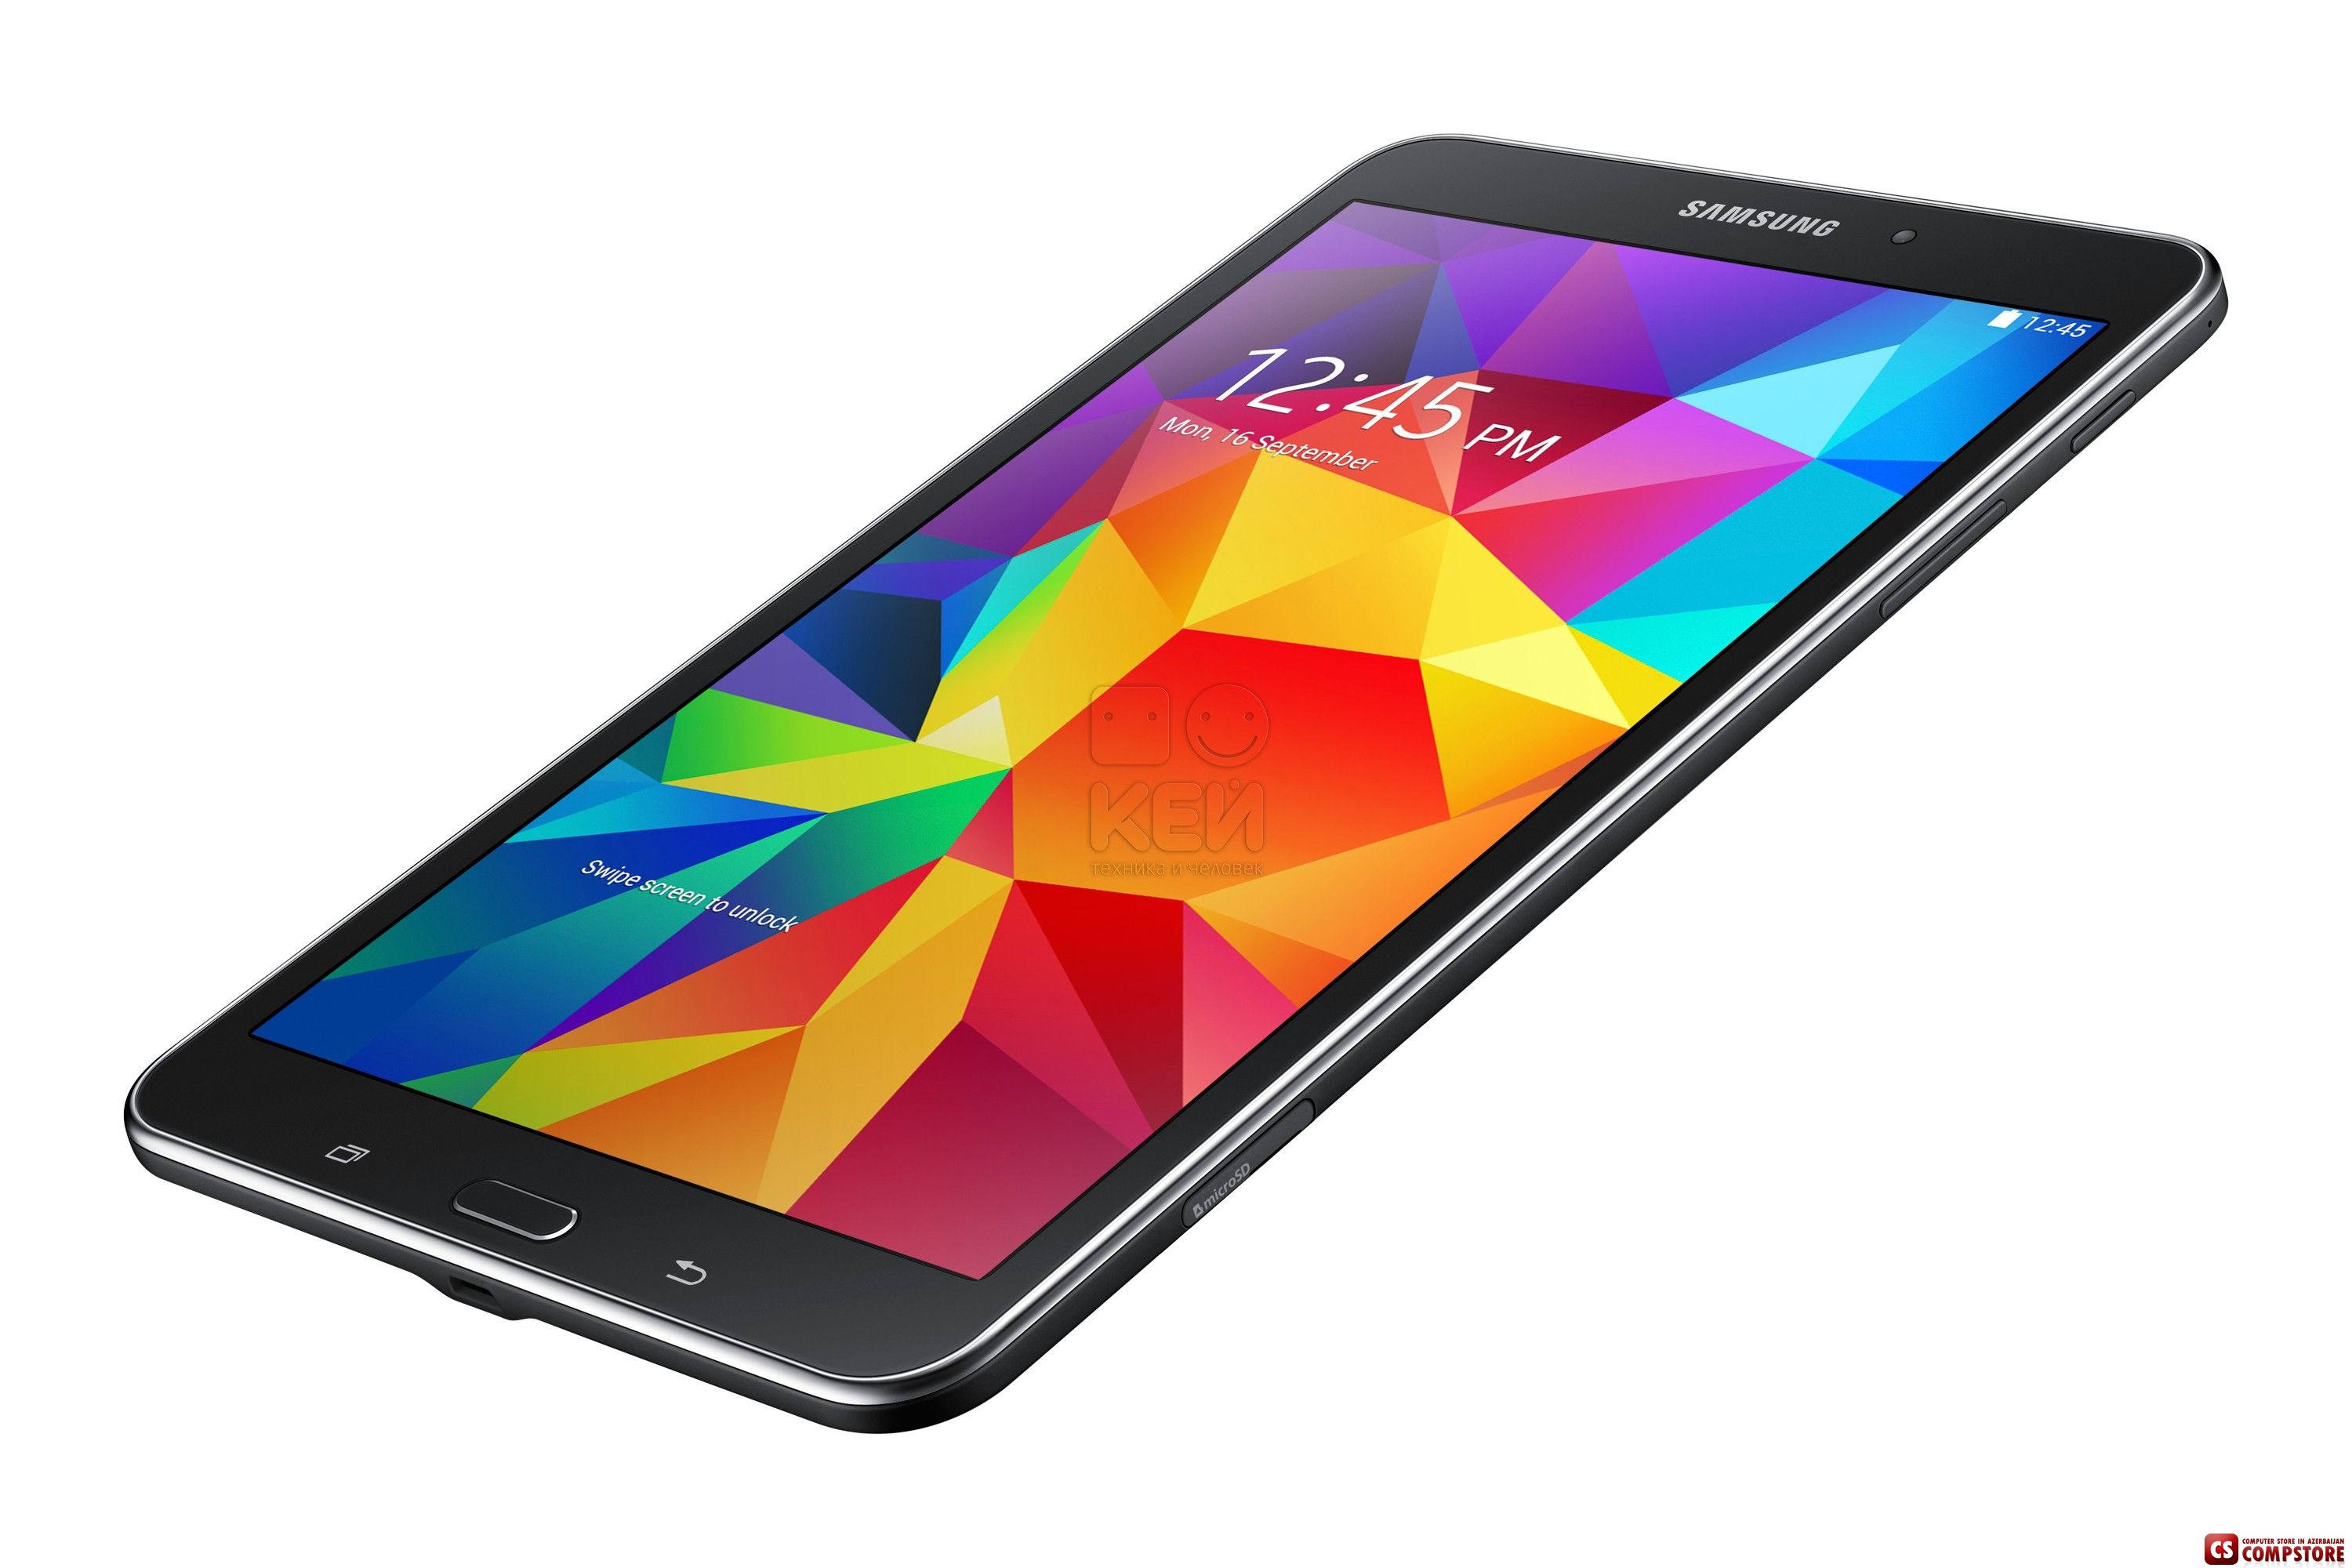 Samsung Galaxy Tab 4 SM-T530 10.1-inch Android Tablet 